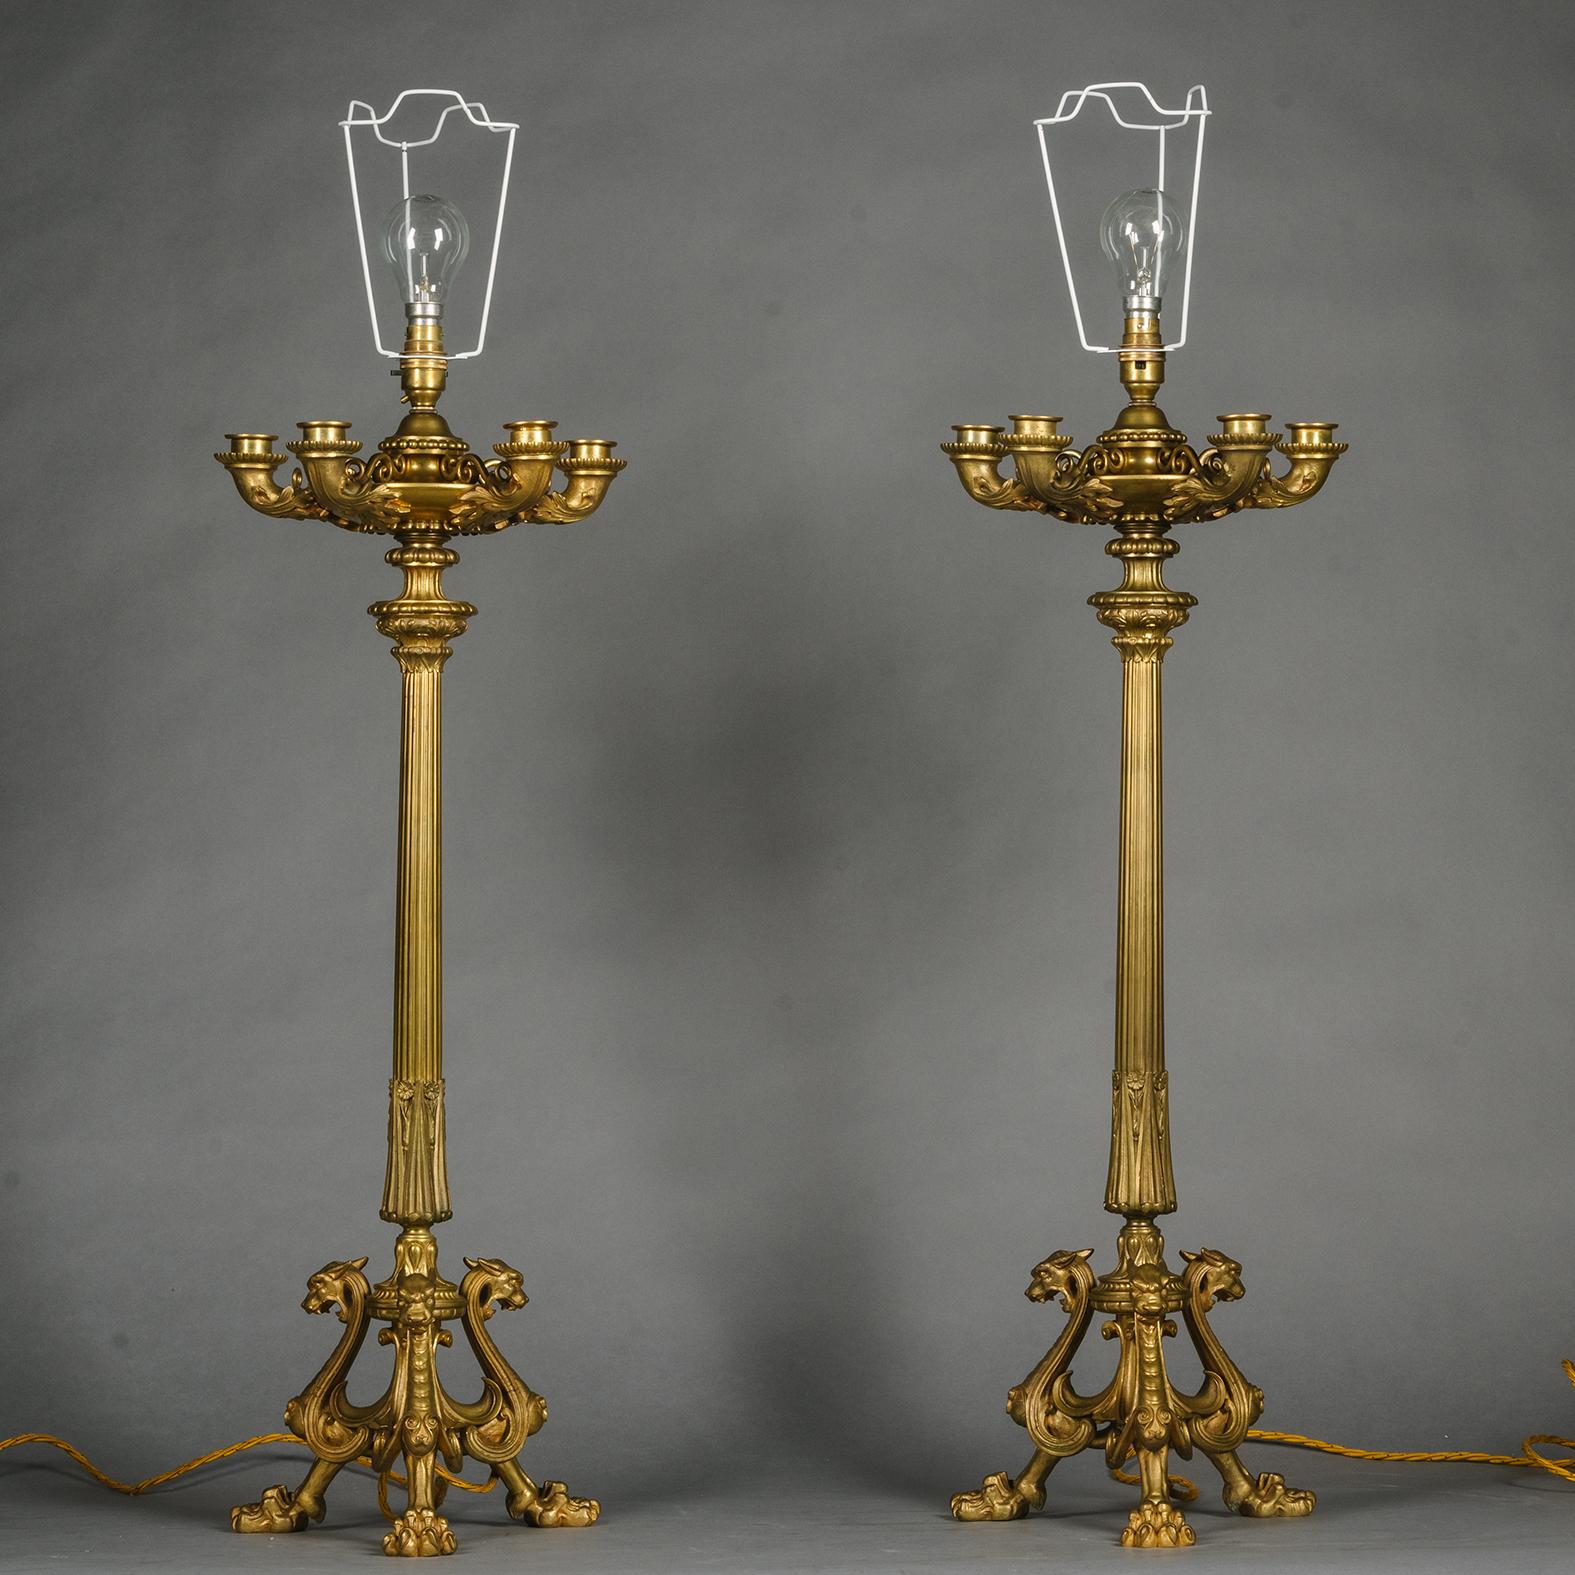 A Pair of Napoleon III Gilt-Bronze Five-Light Candelabra, Fitted As Lamps. 

Designed in the Neo-Grec style with three chimera modelled feet supporting a fluted stem and oil-lamp like body with four candle arms and a central nozzle with bulb